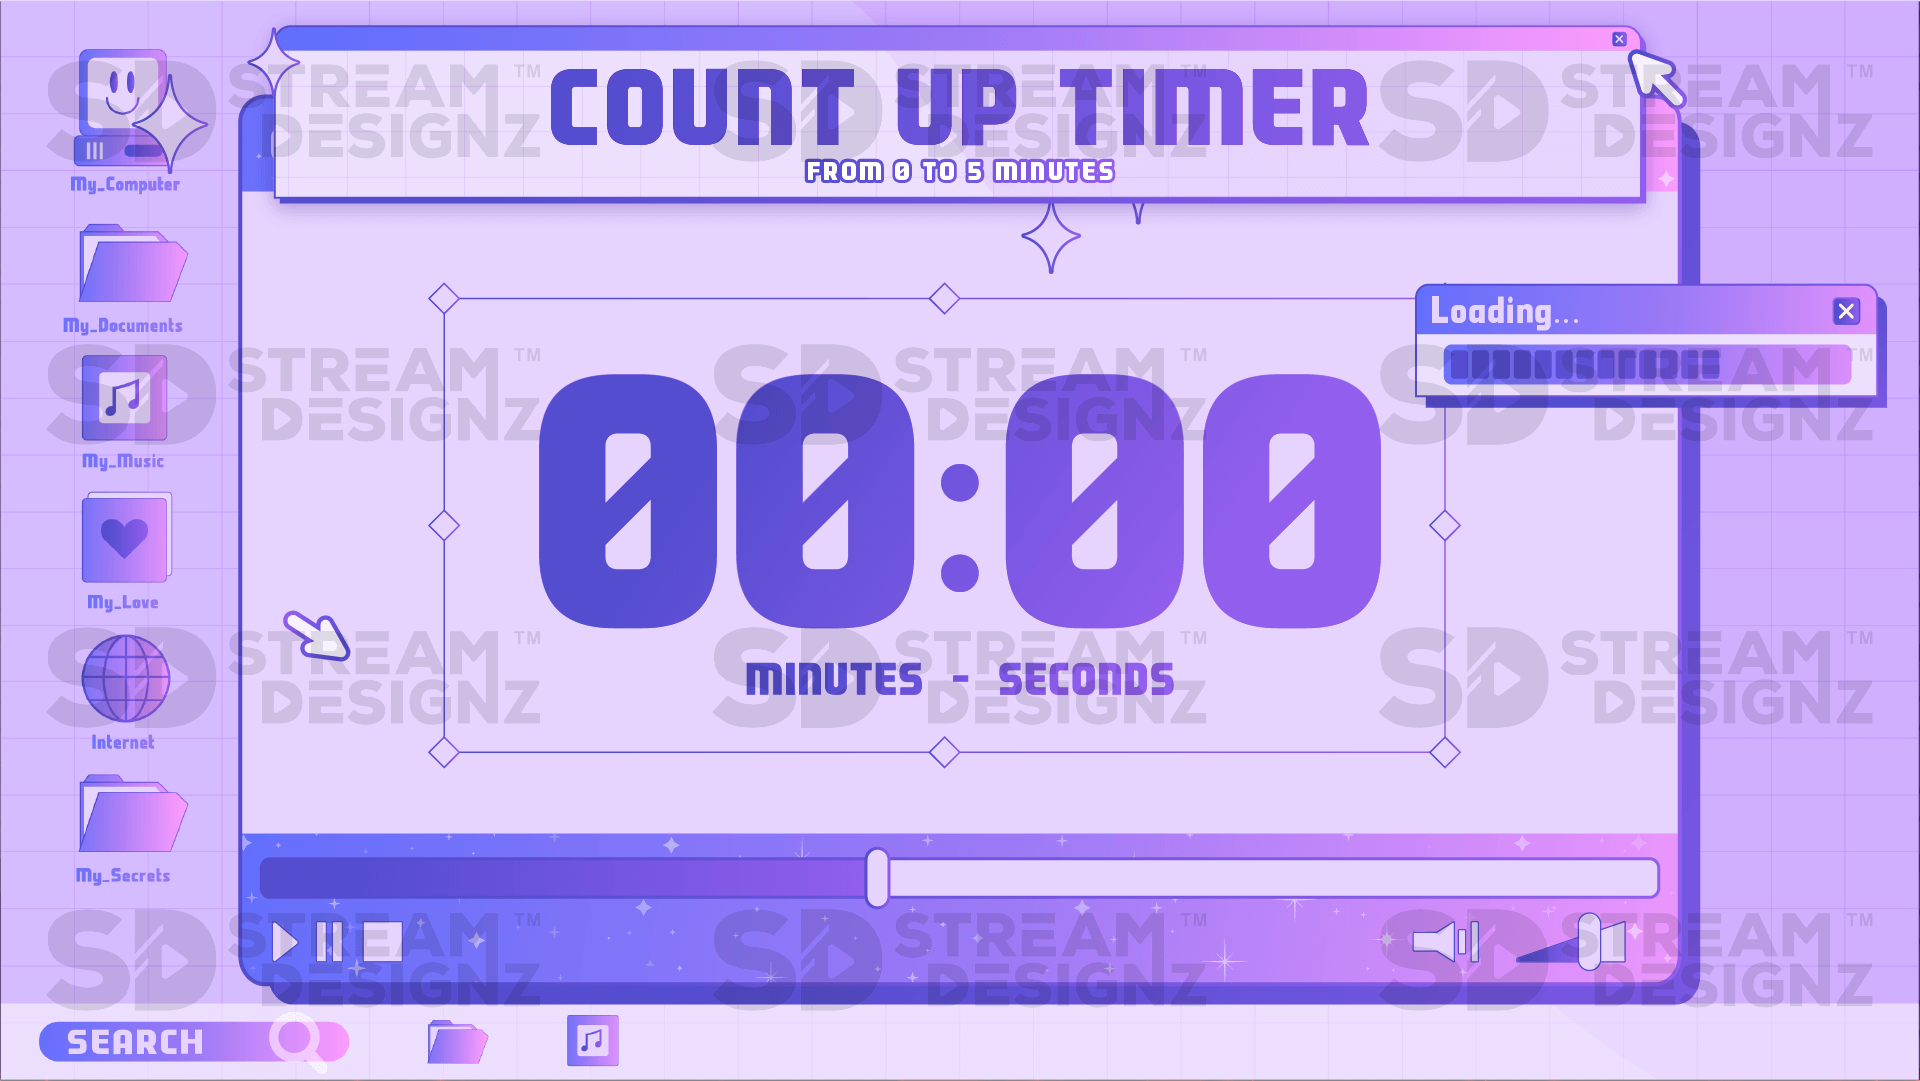 Ultimate stream package 5 minute count up timer y2k stream designz